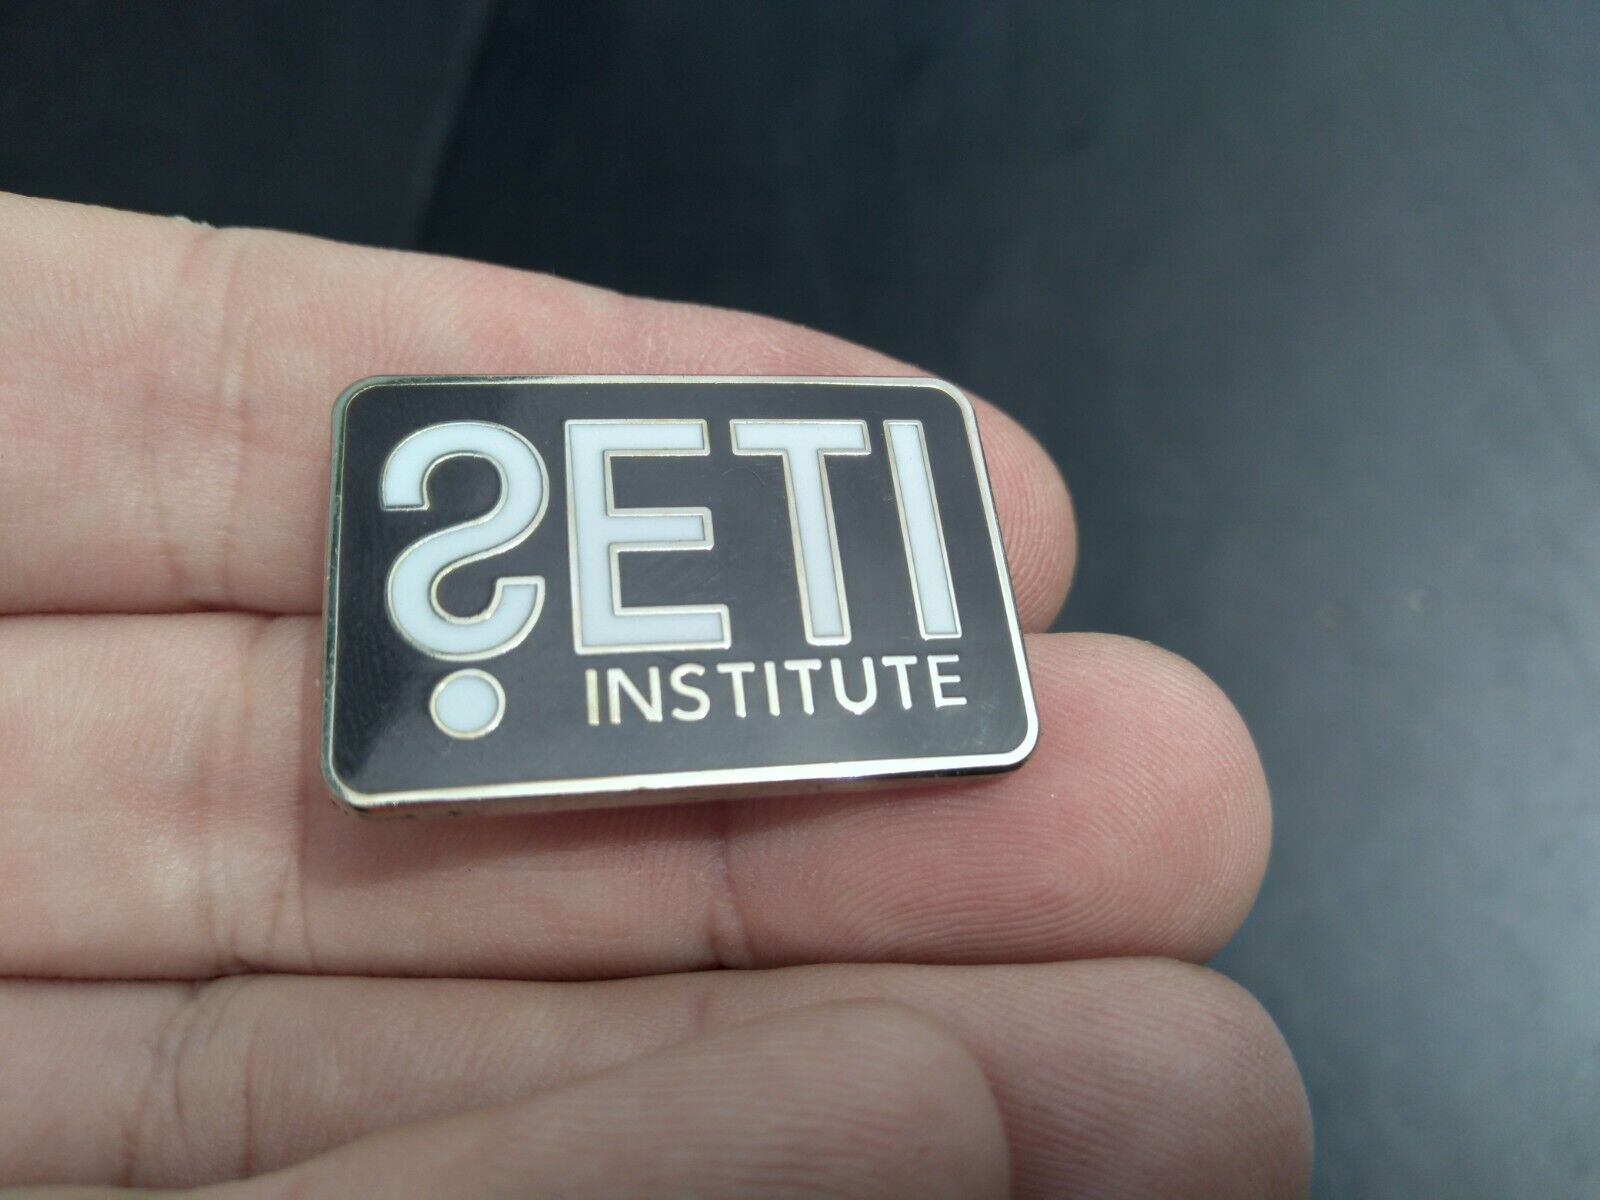 Rare Vintage SETI Institute Search for ExtraTerrestrial Intelligence Enamel Pin